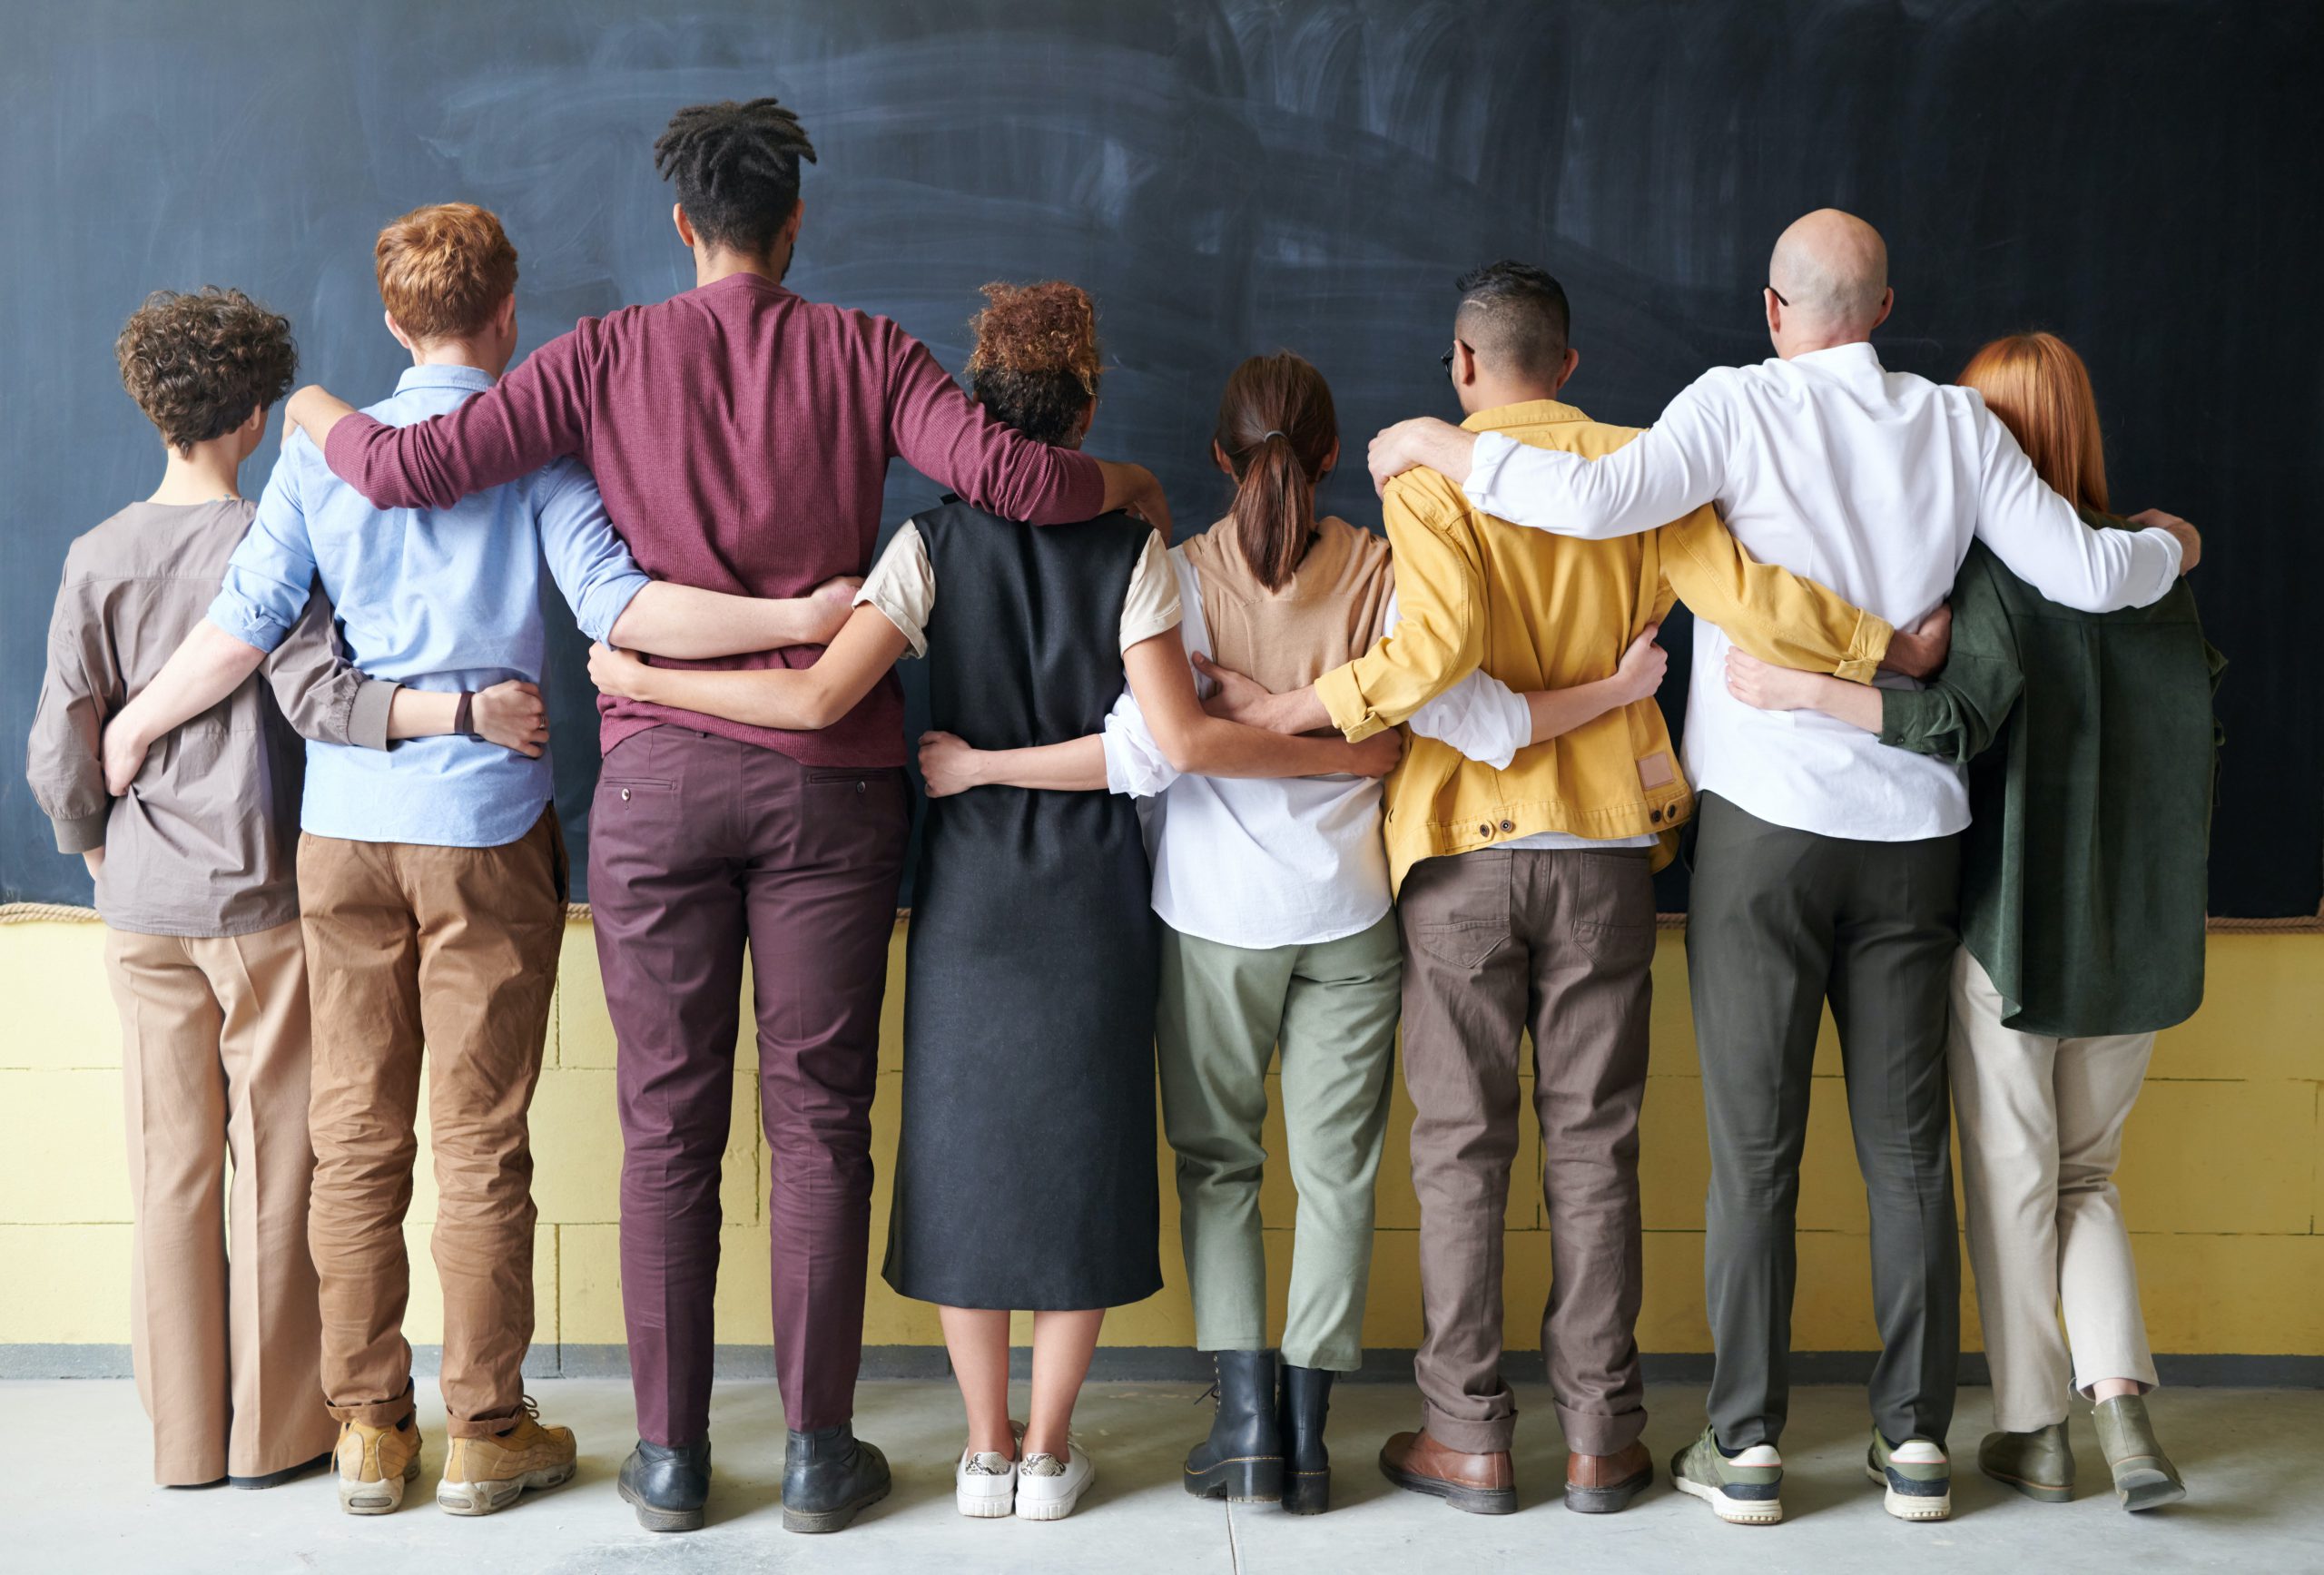 Group of teachers and students holding each other facing a chalkboard